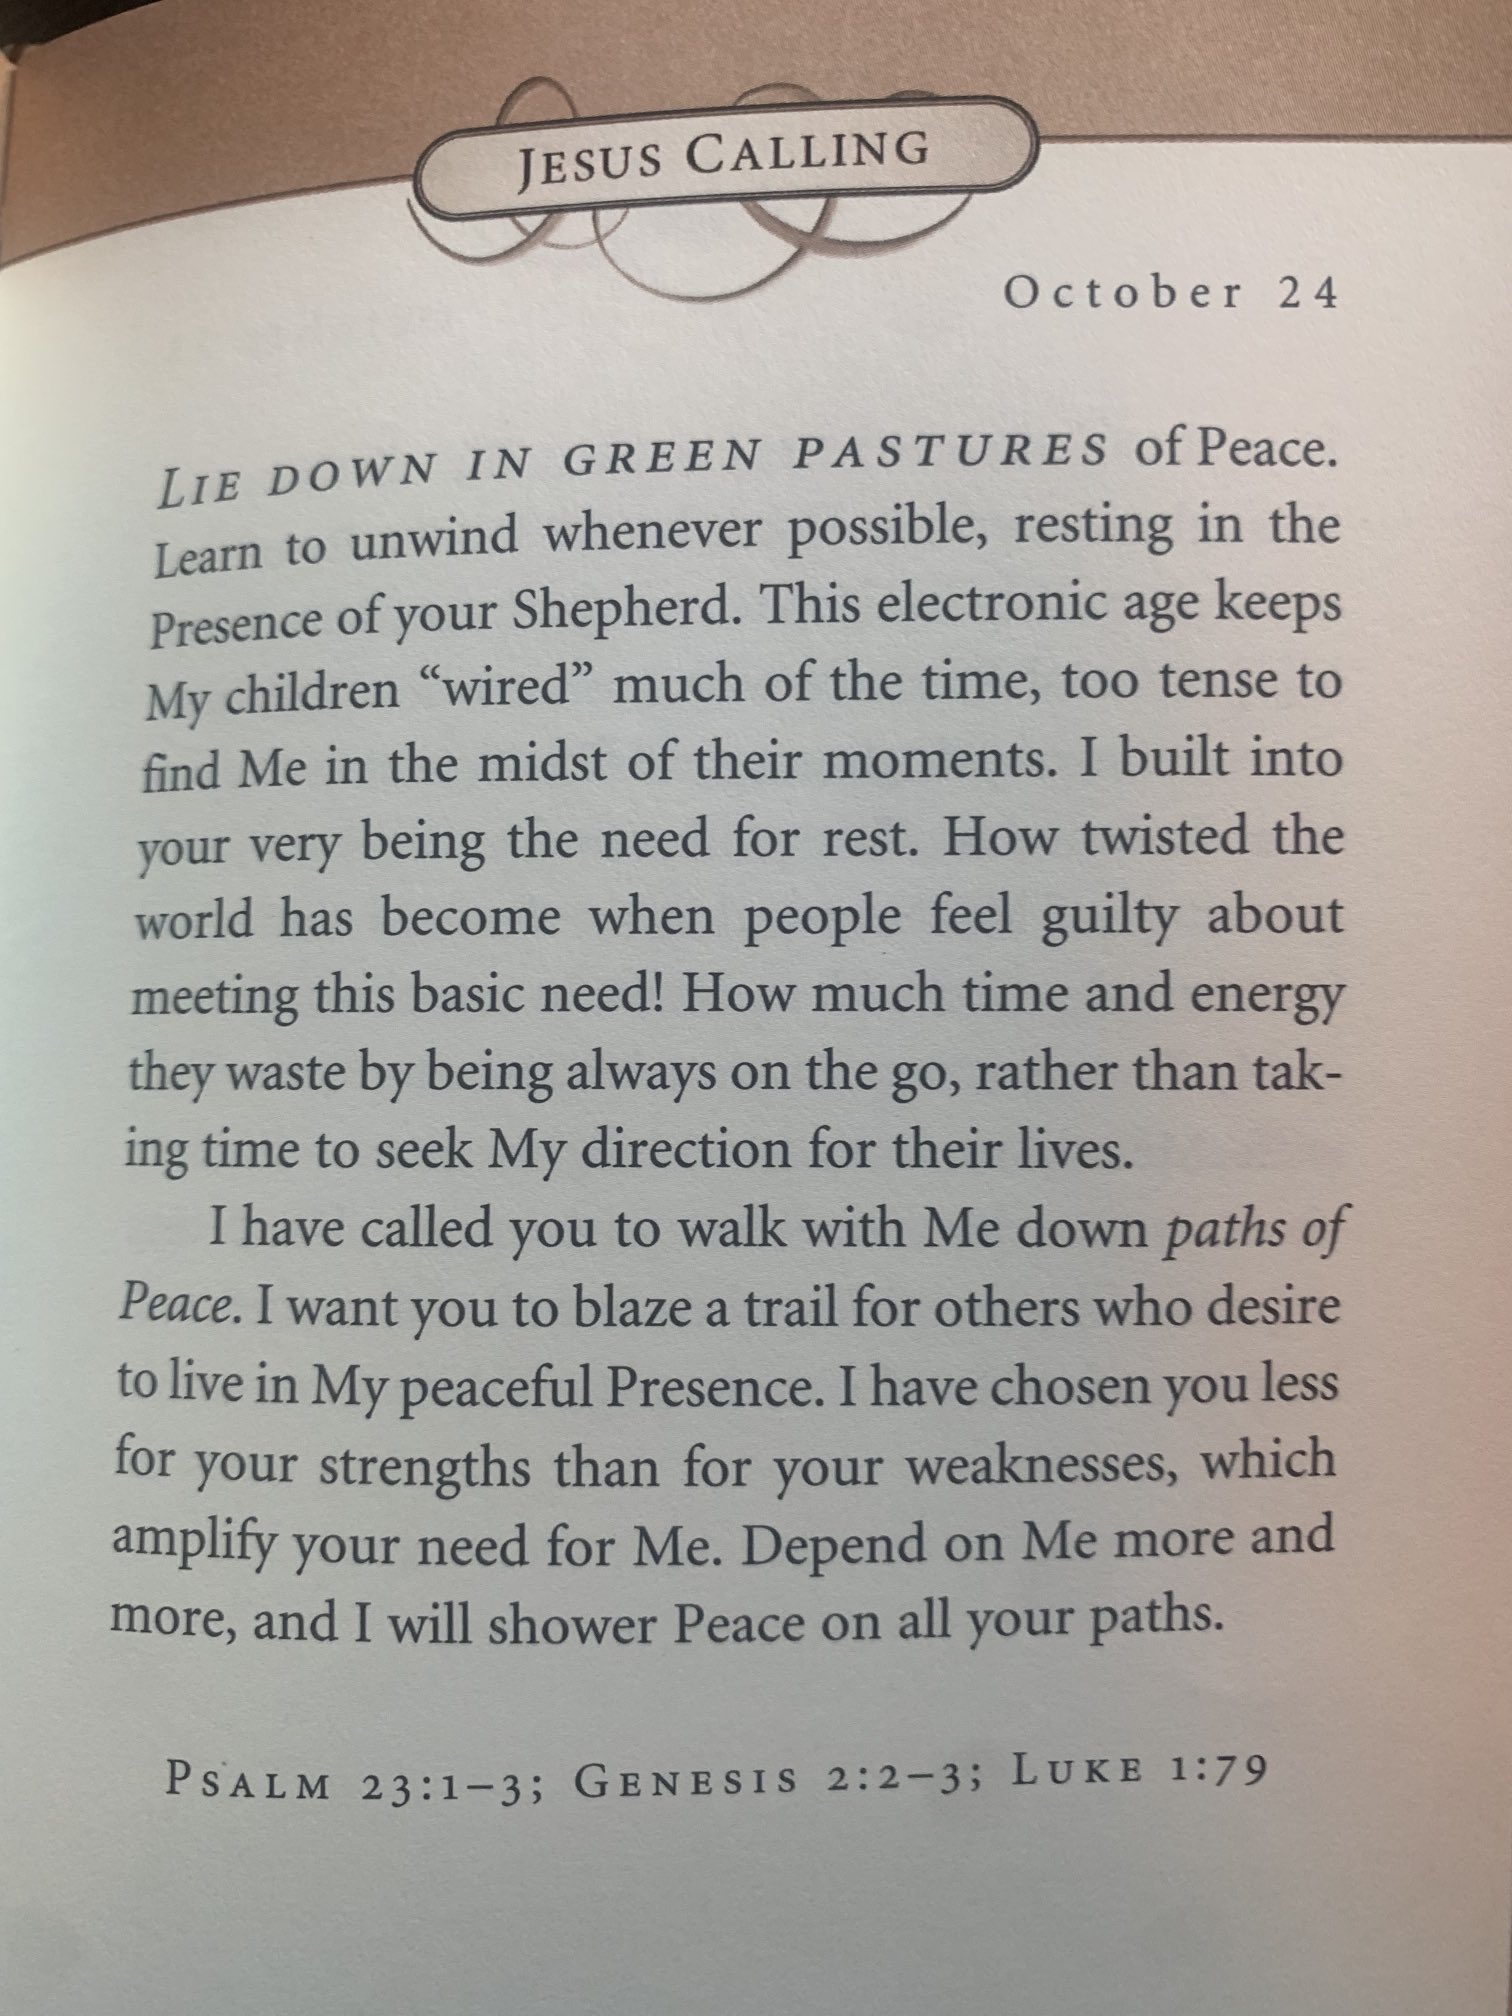 JESUS CALLING October 24 DOWN IN GREEN PASTURES of Peace: LIE unwind whenever possible, resting in the Learn Presence of your Shepherd. This electronic age My children wired" much of the time; too tense to find Me in the midst of their moments I built into your very the need for rest: How twisted the world has become when people guilty about meeting this basic need! How much time and energy they waste by being always on the g0, rather than tak- ing time to seek My direction for their lives. have called you to walk with Me down of Peace. I want you to blaze a trail for others who desire to live in My peaceful Presence. Ihave chosen you less for your strengths than for your weaknesses, which amplify your need for Me. Depend on Me more and more, and will shower Peace on all your PsALM 23:1-3; GENEST$ 2:2-3; LuKE 1:79 keeps being feel paths paths: